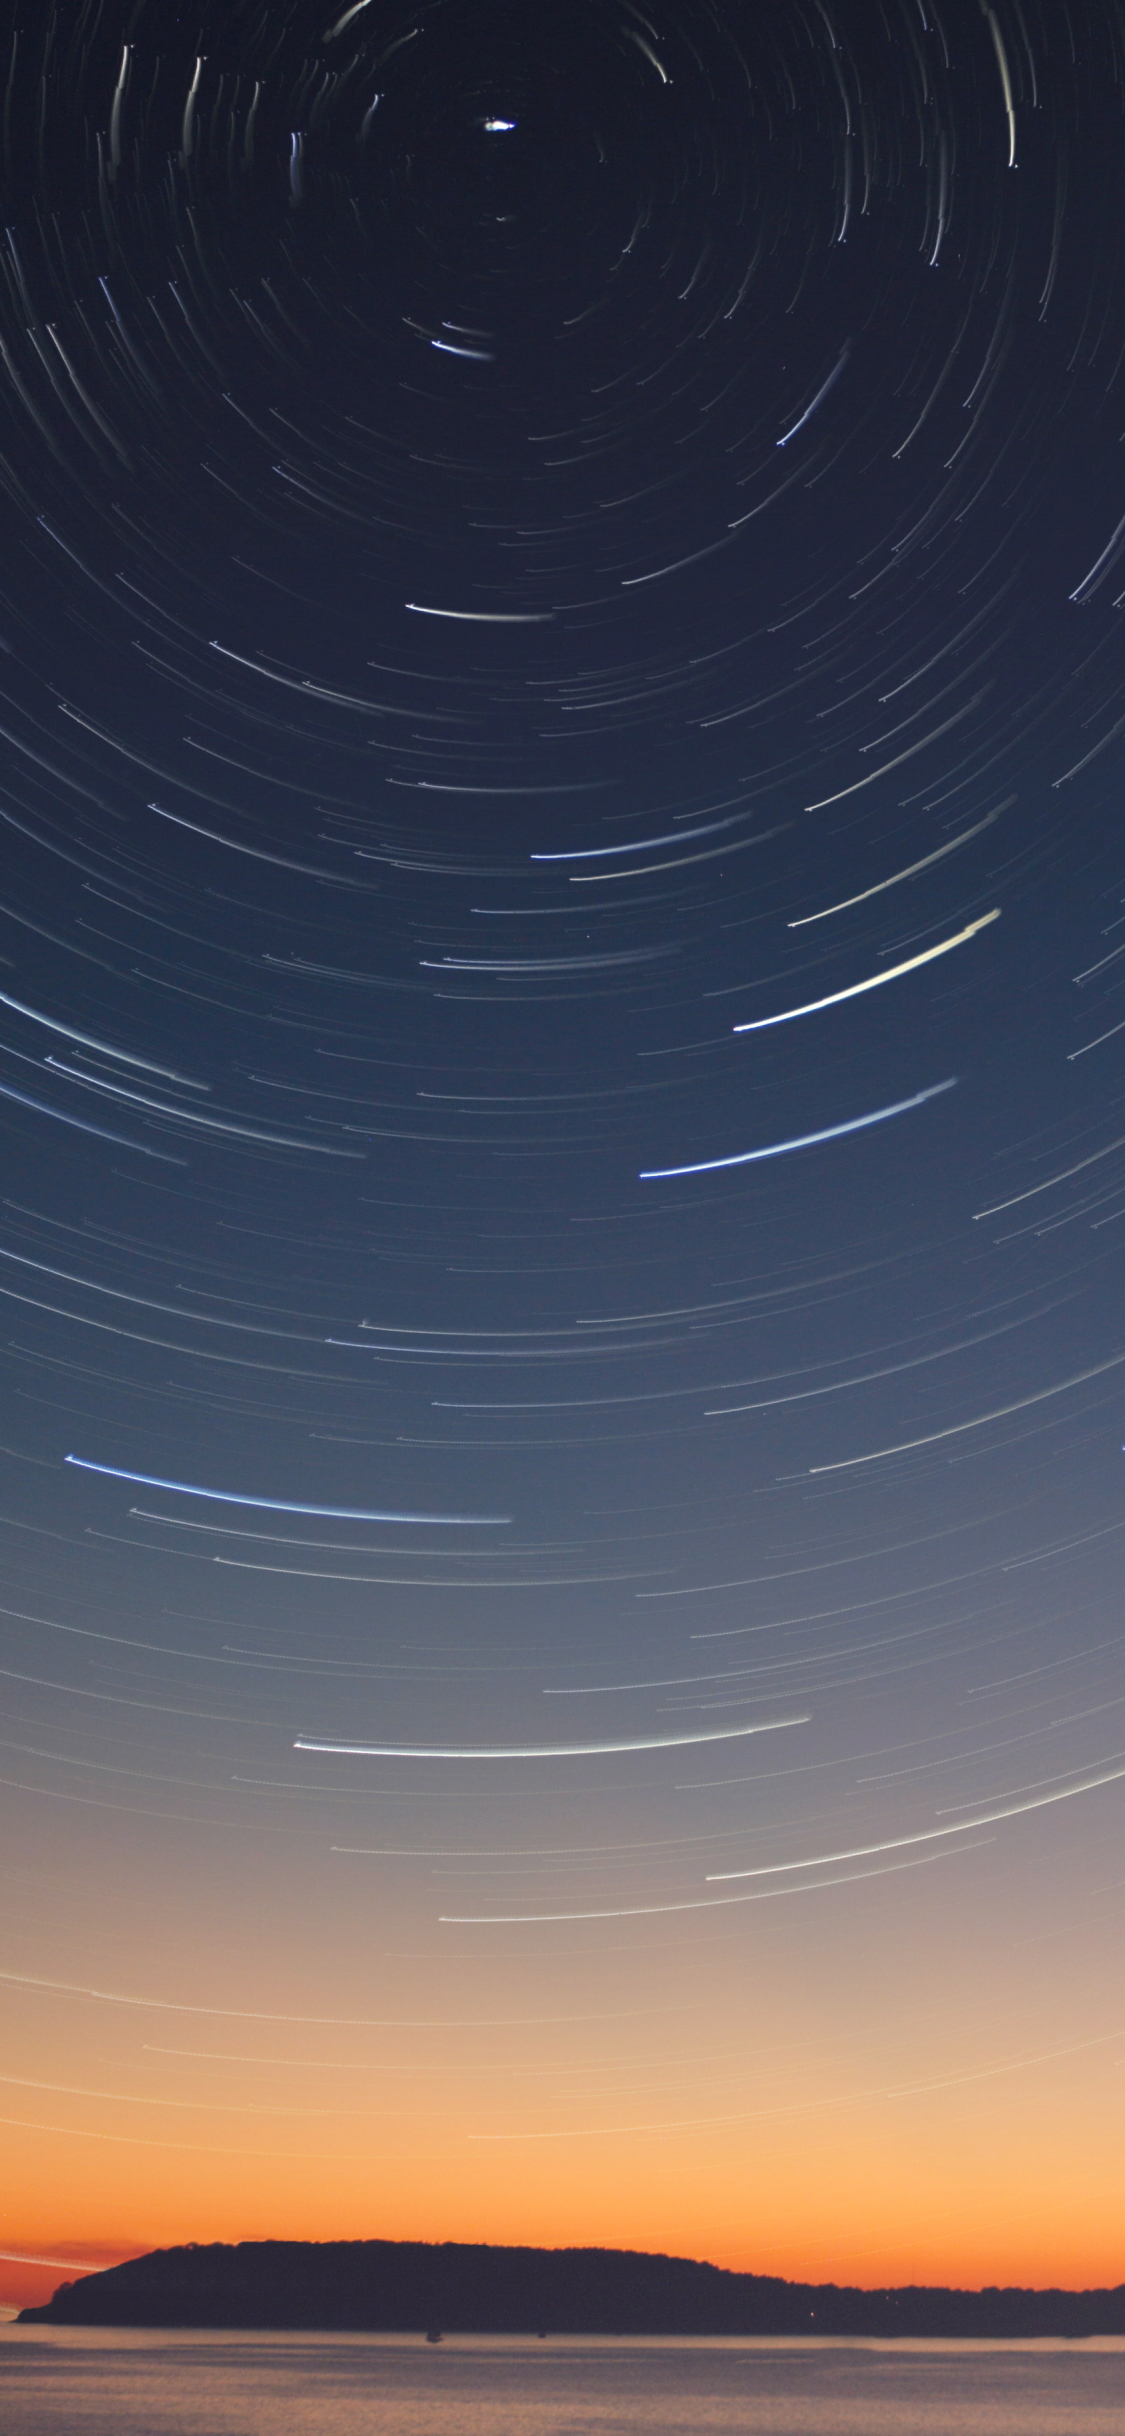 star trail, earth, nature, night, sky